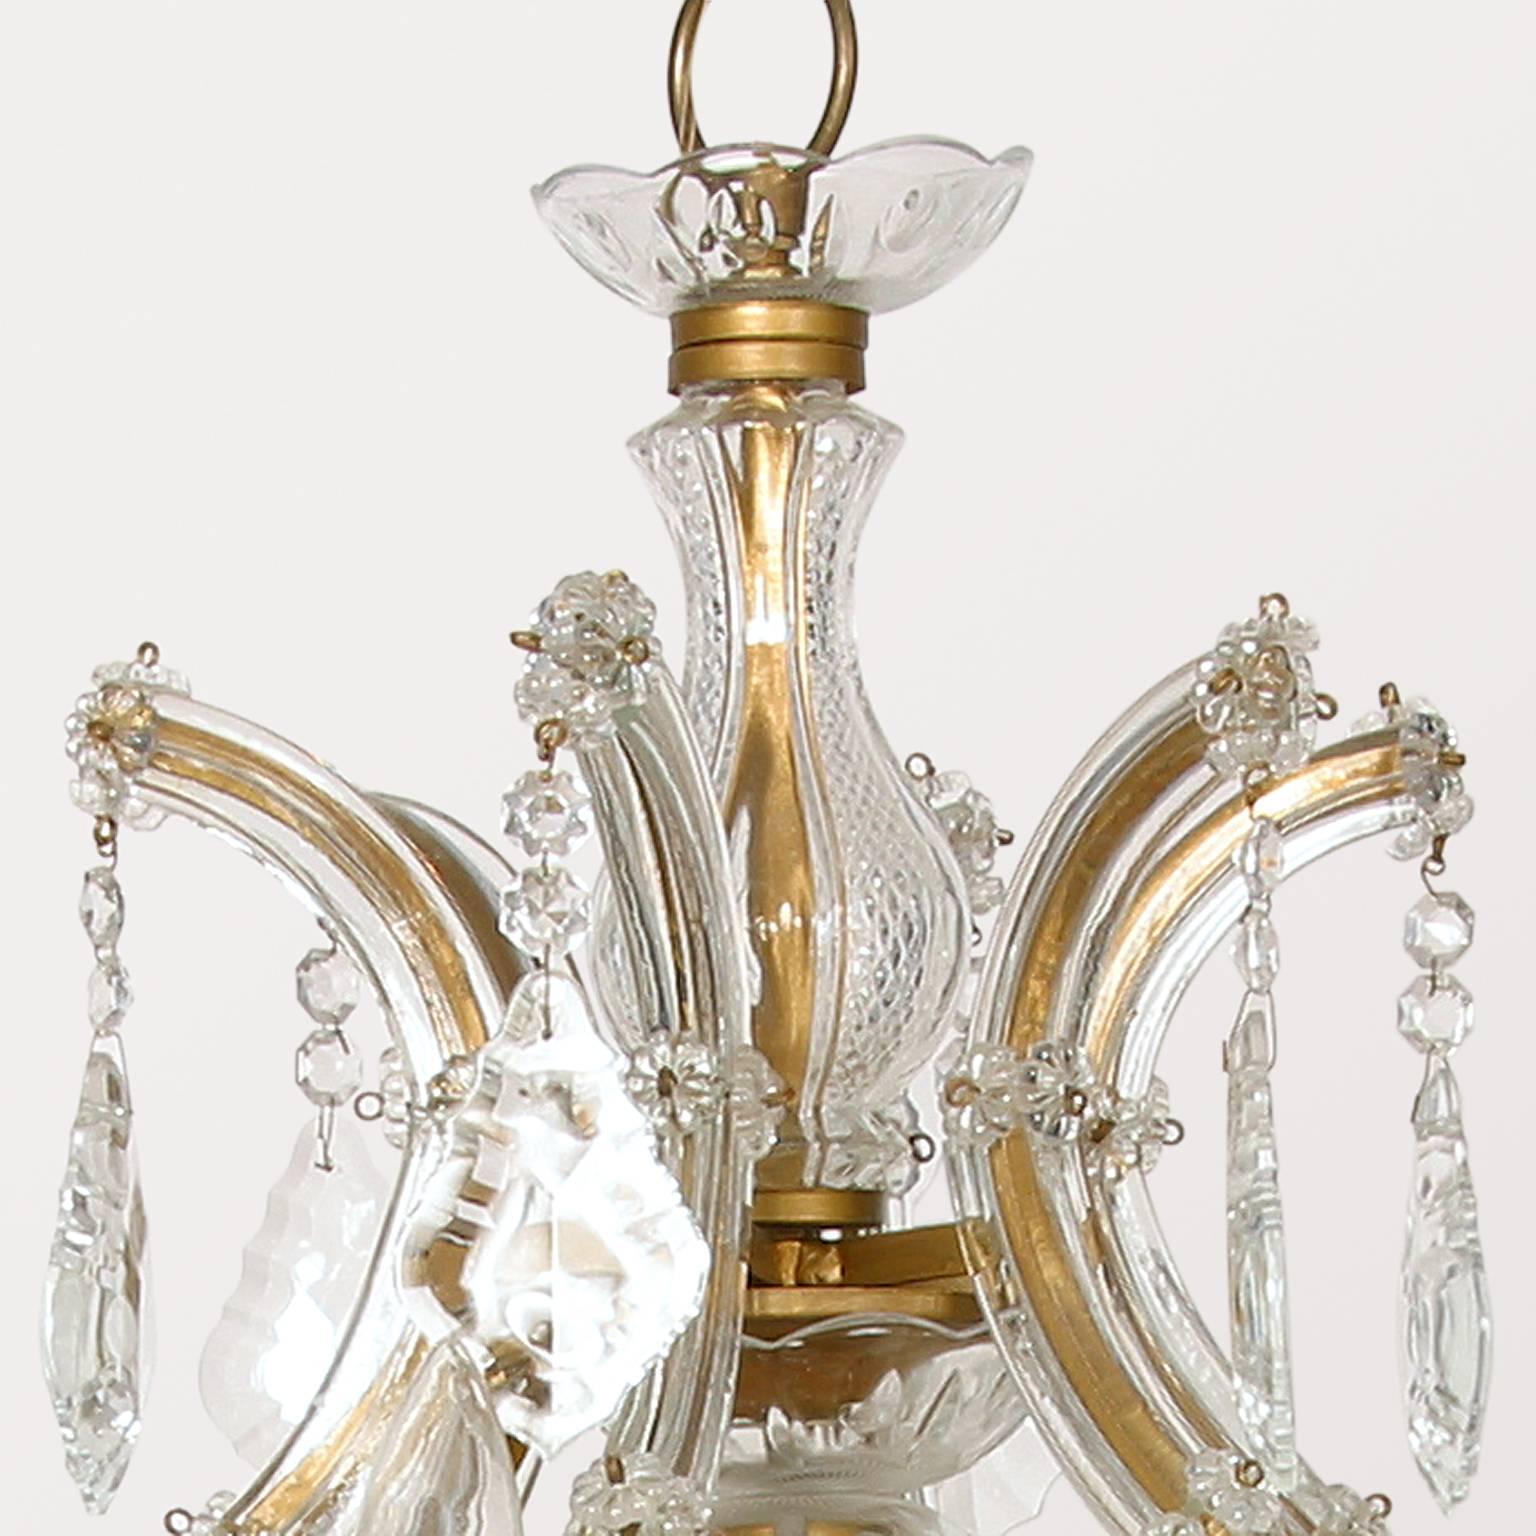 Italian sixteen-light (two-tier 15 light with one light in the middle) Maria Theresa Chandelier dating from the mid-1950s, lavishly laden with typical European cut crystal prisms, rosettes and beaded chain. Framework is gold painted with flat glass